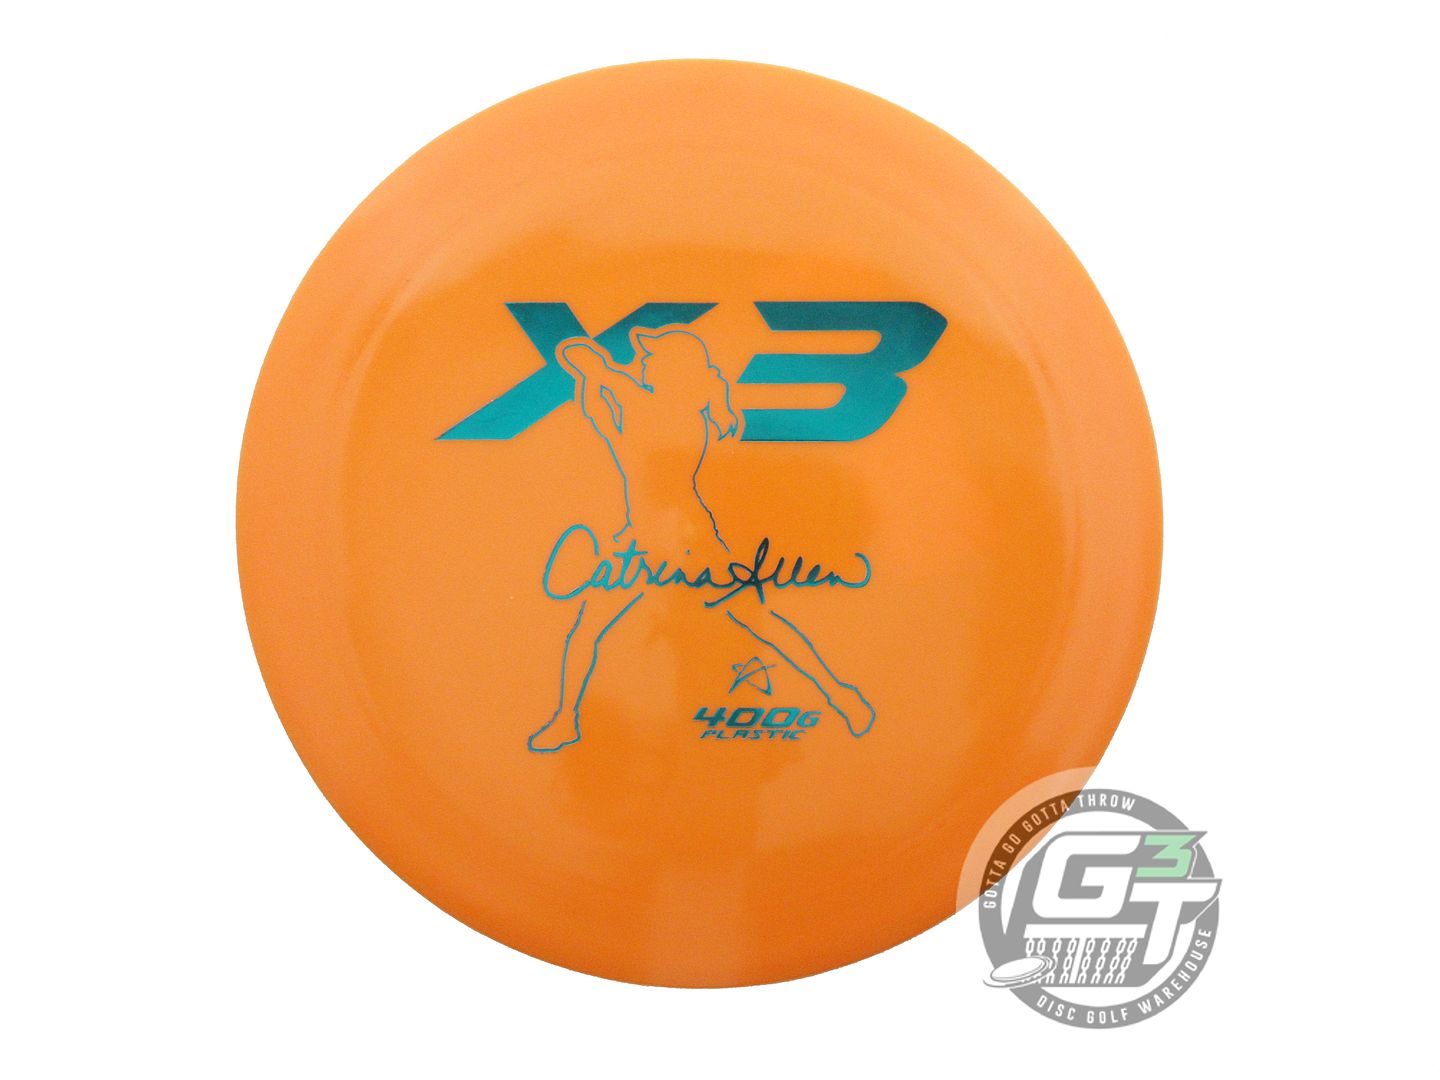 Prodigy Limited Edition 2021 Signature Series Catrina Allen 400G Series X3 Distance Driver Golf Disc (Individually Listed)